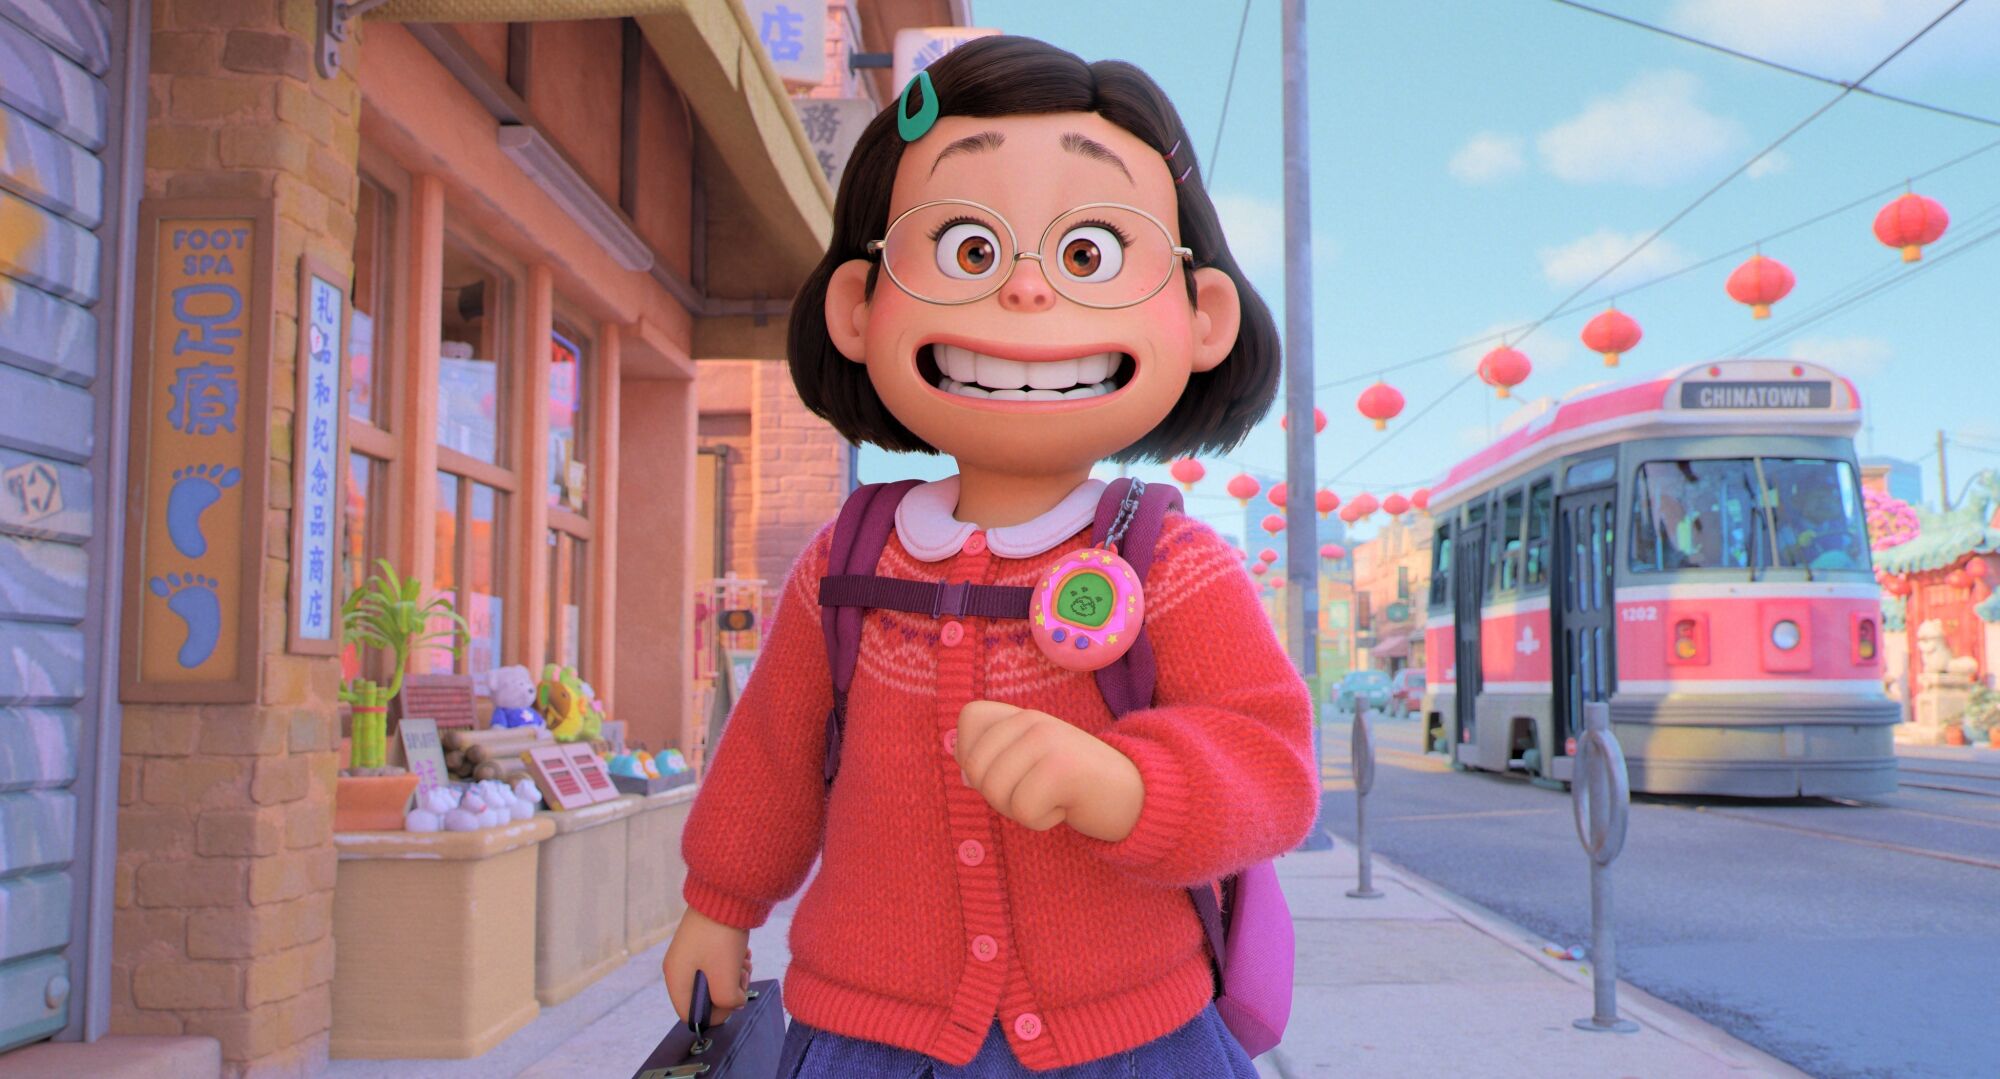 Meilin, voiced by Rosalie Chiang, in a scene from the Pixar movie "Turning Red."